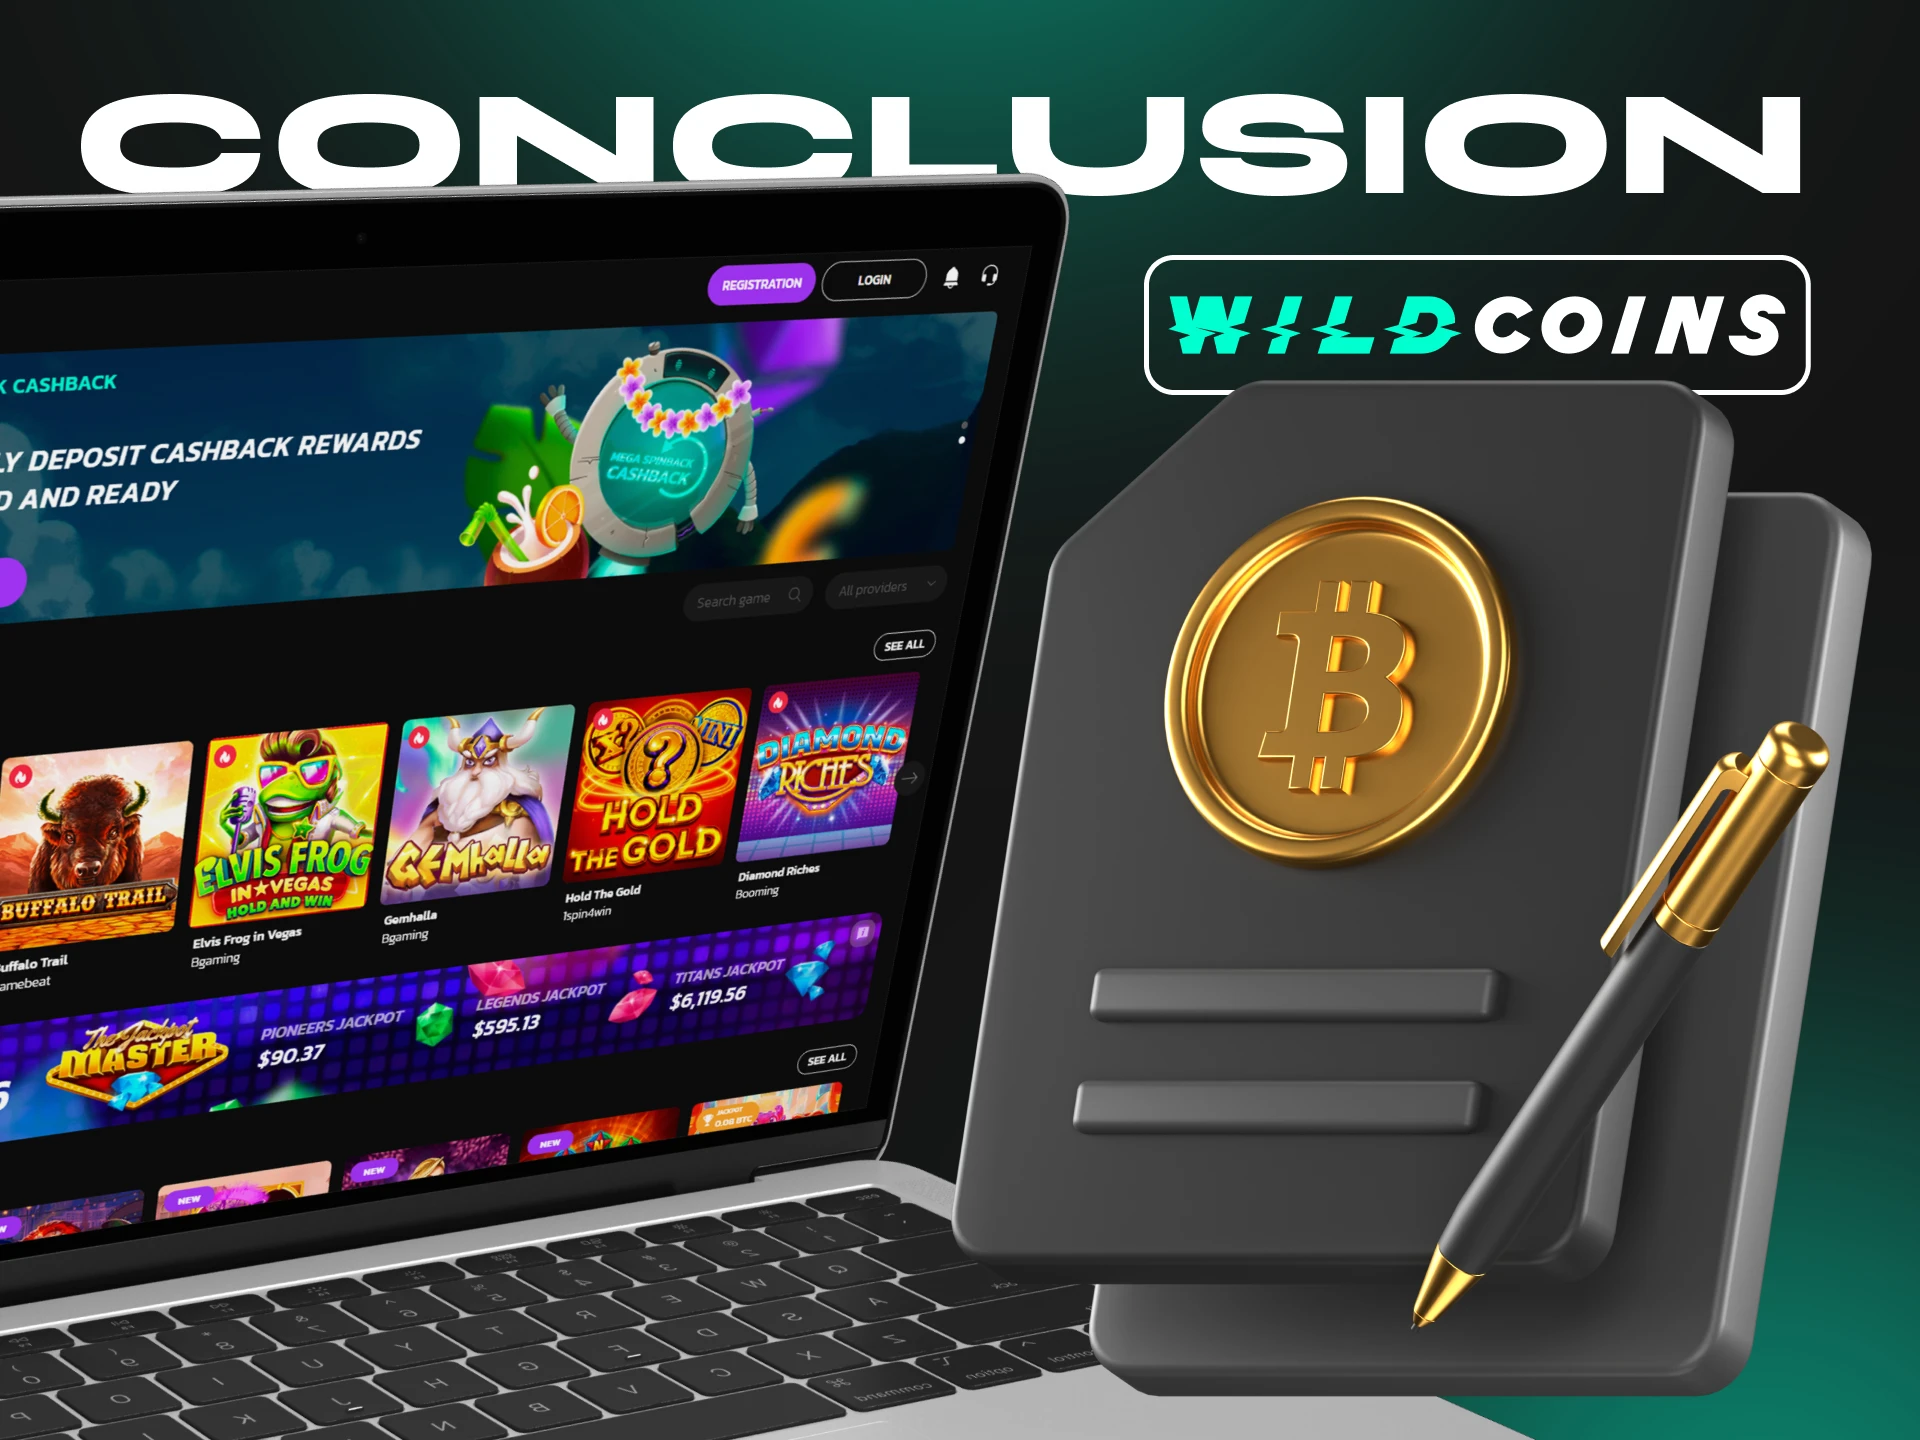 Wildcoins is a casino with a wide variety of games and bonuses.